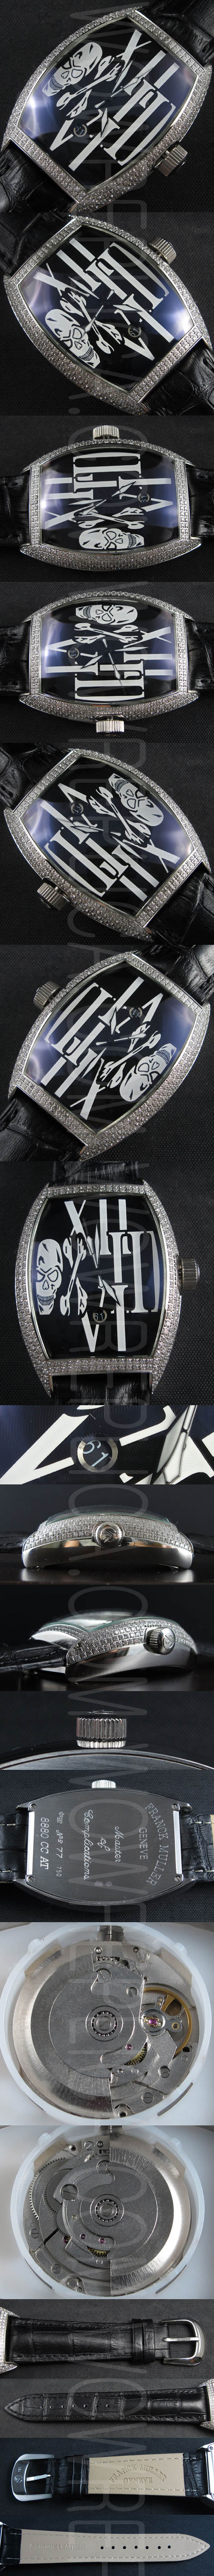 Replica Franck Muller Master of Complications Watches